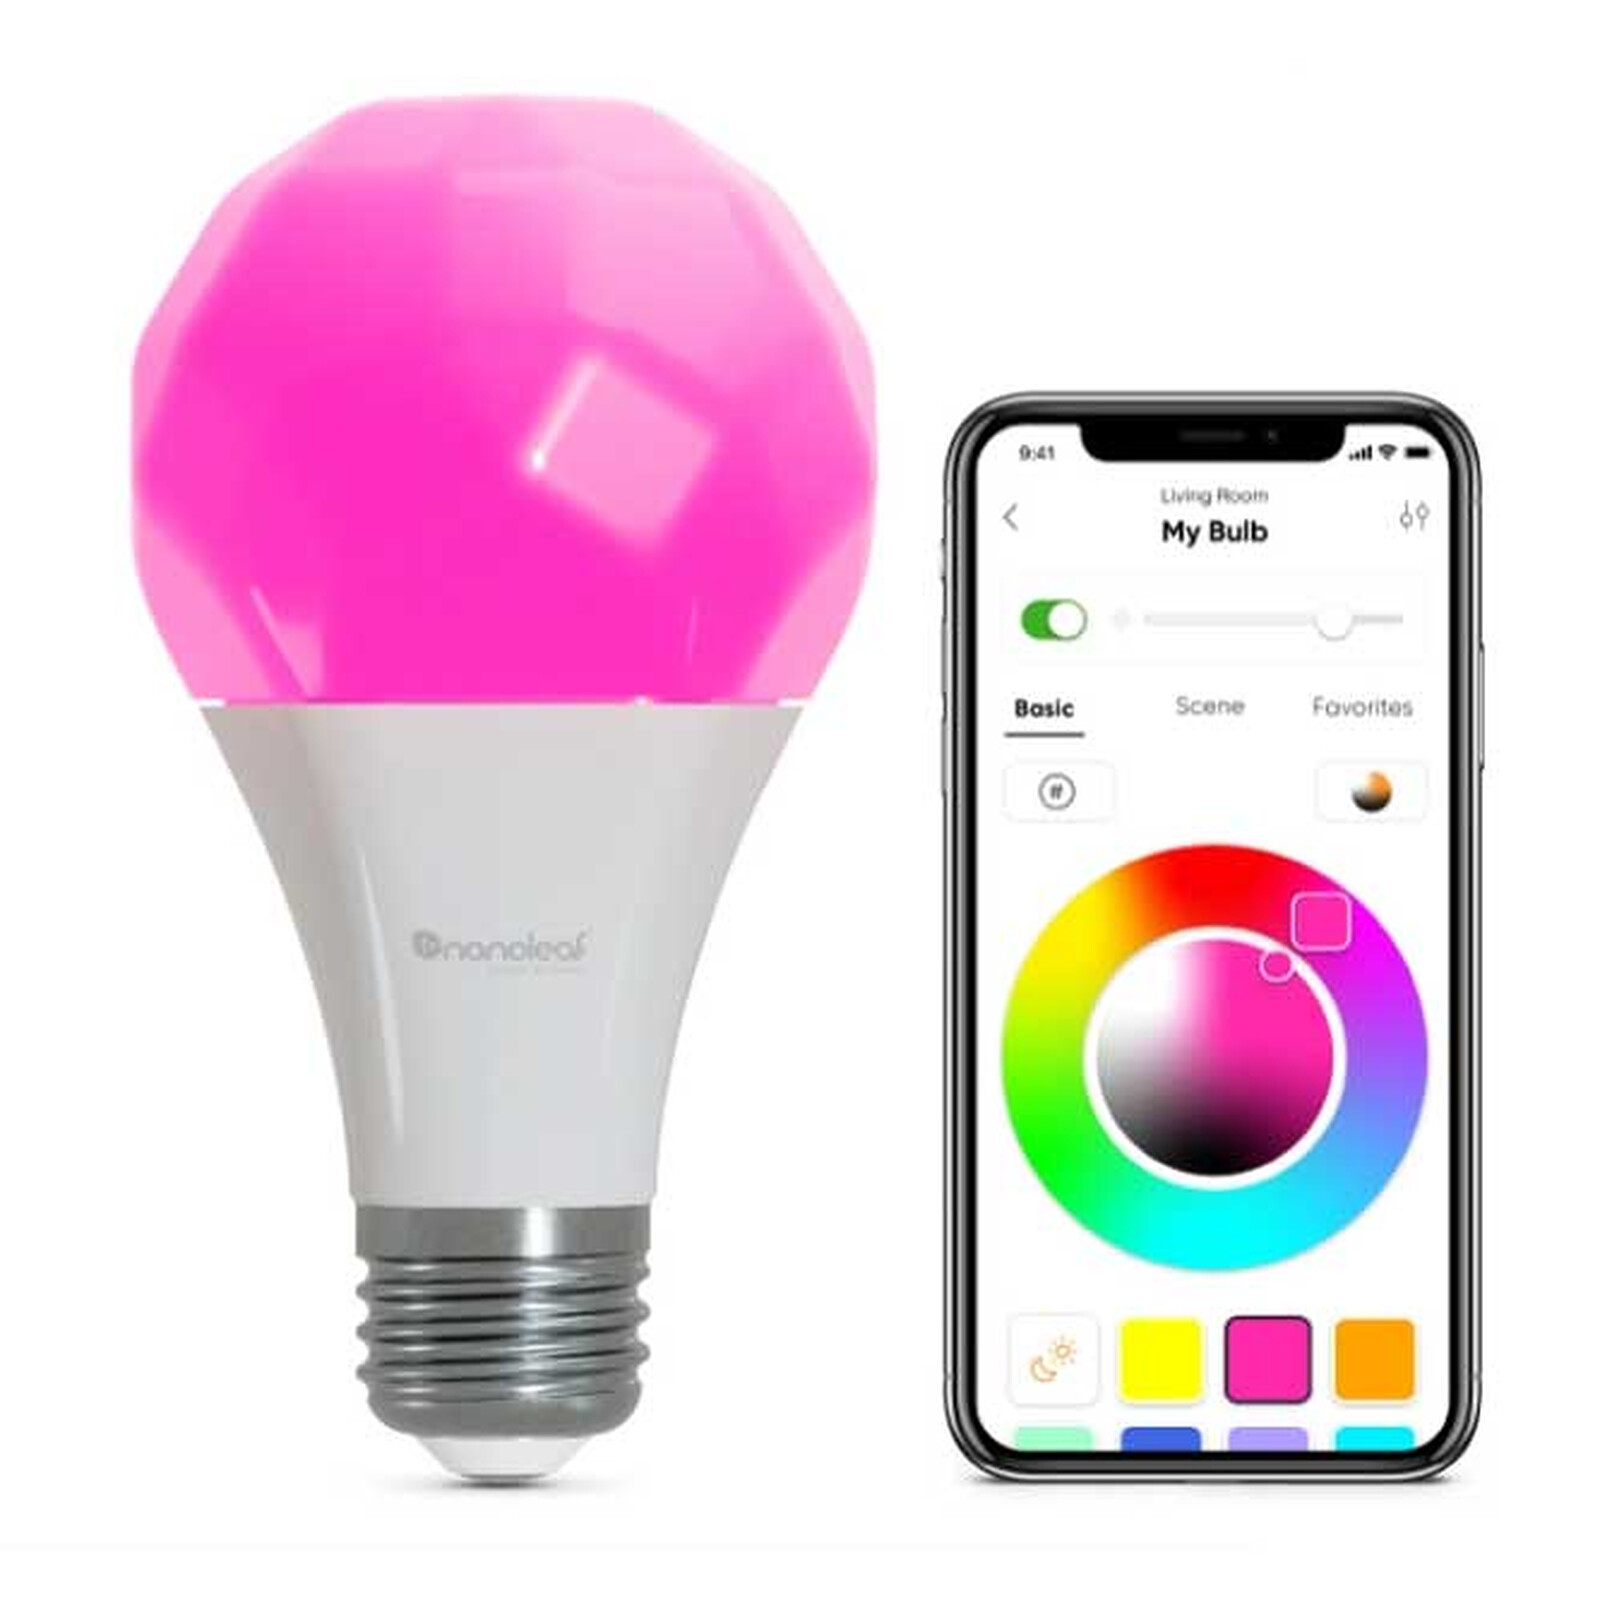 Philips Hue White and Color E27 A60 11 W Bluetooth x 2 - Smart light bulb -  LDLC 3-year warranty